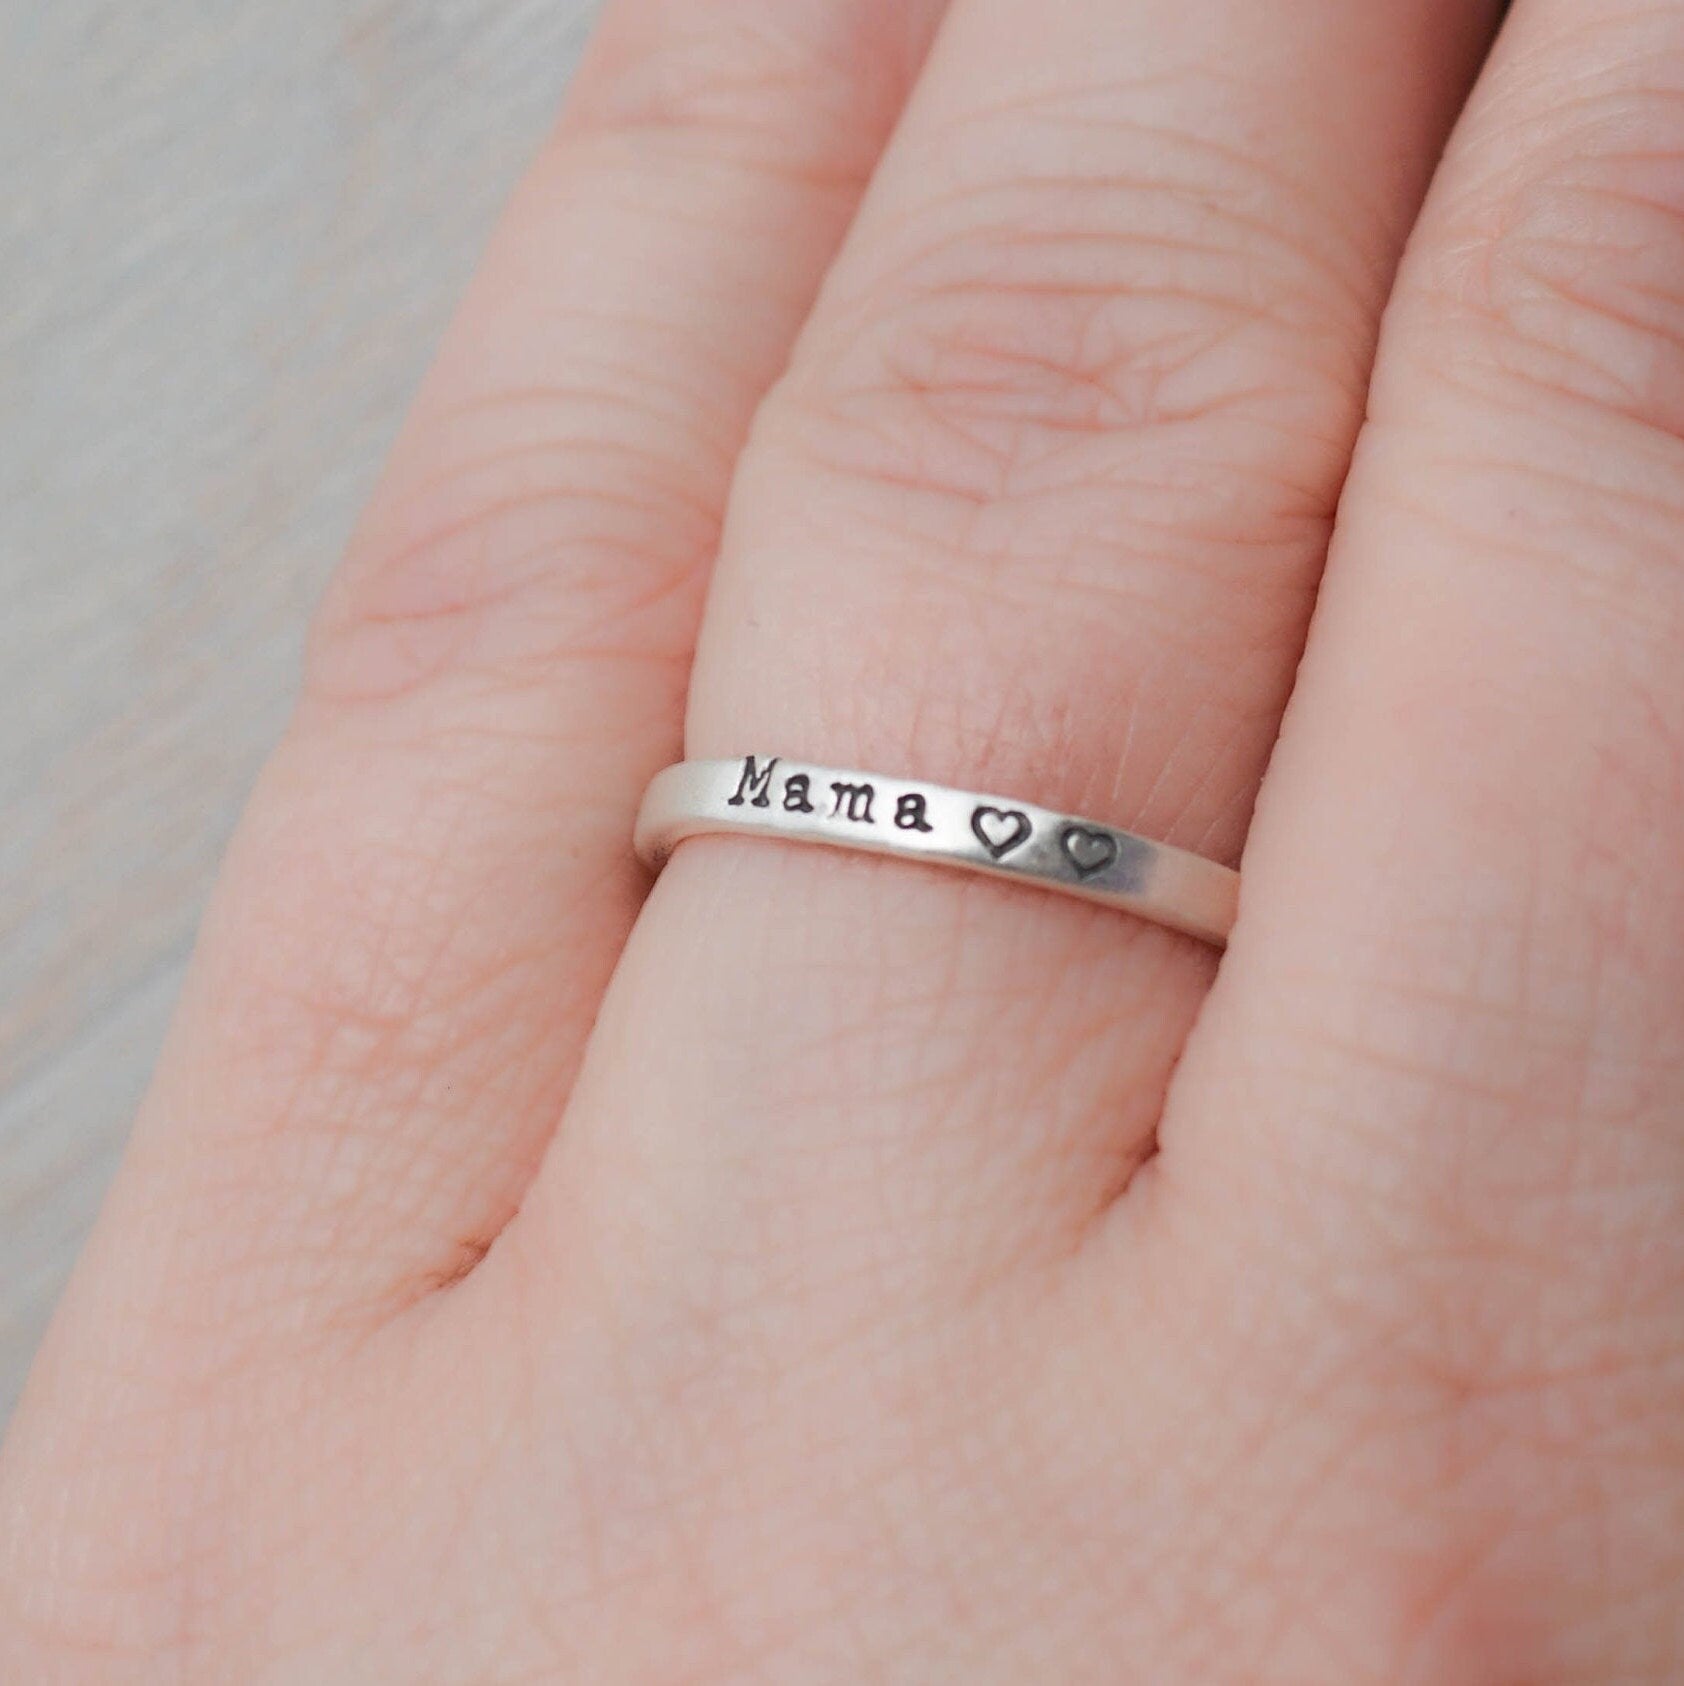 Sterling silver ring handstamped with Mama and two hearts on hand